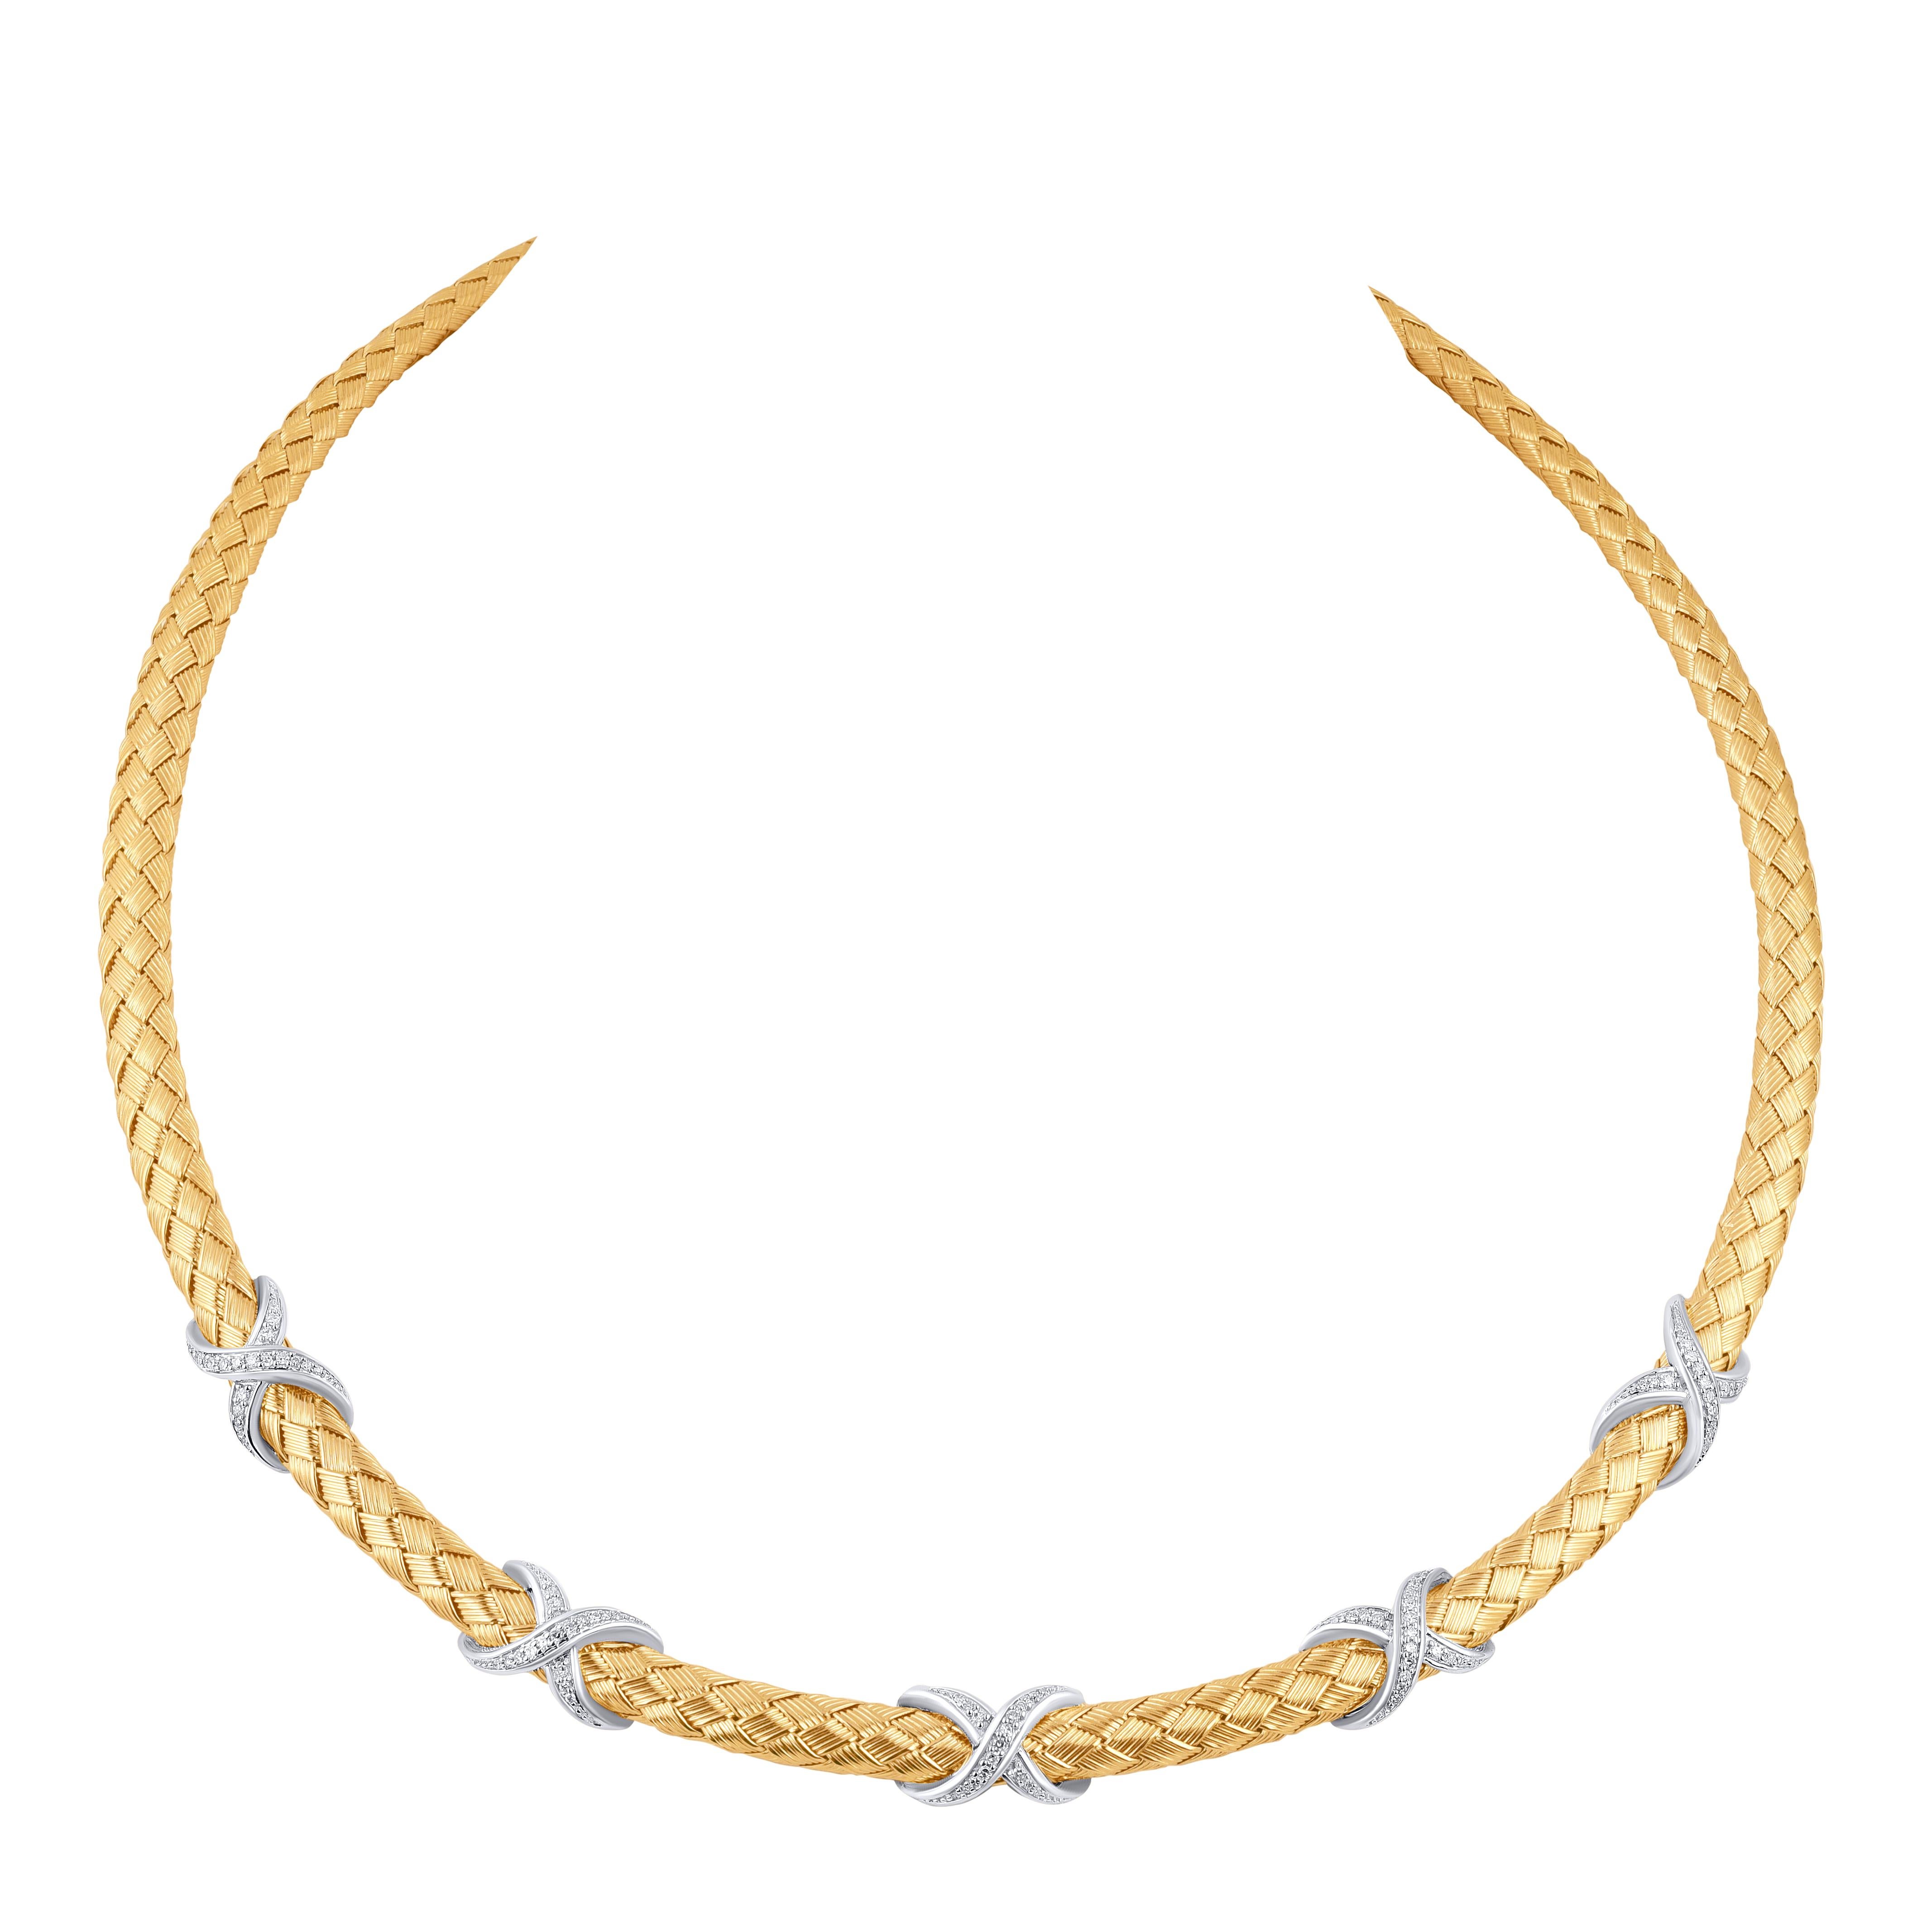 A beautifully designed Italian made Mesh Gold necklace studded with 85 diamonds in pave setting expertly crafted in 14-Karat Yellow Gold. The diamonds are graded I-J Color, I1 Clarity.